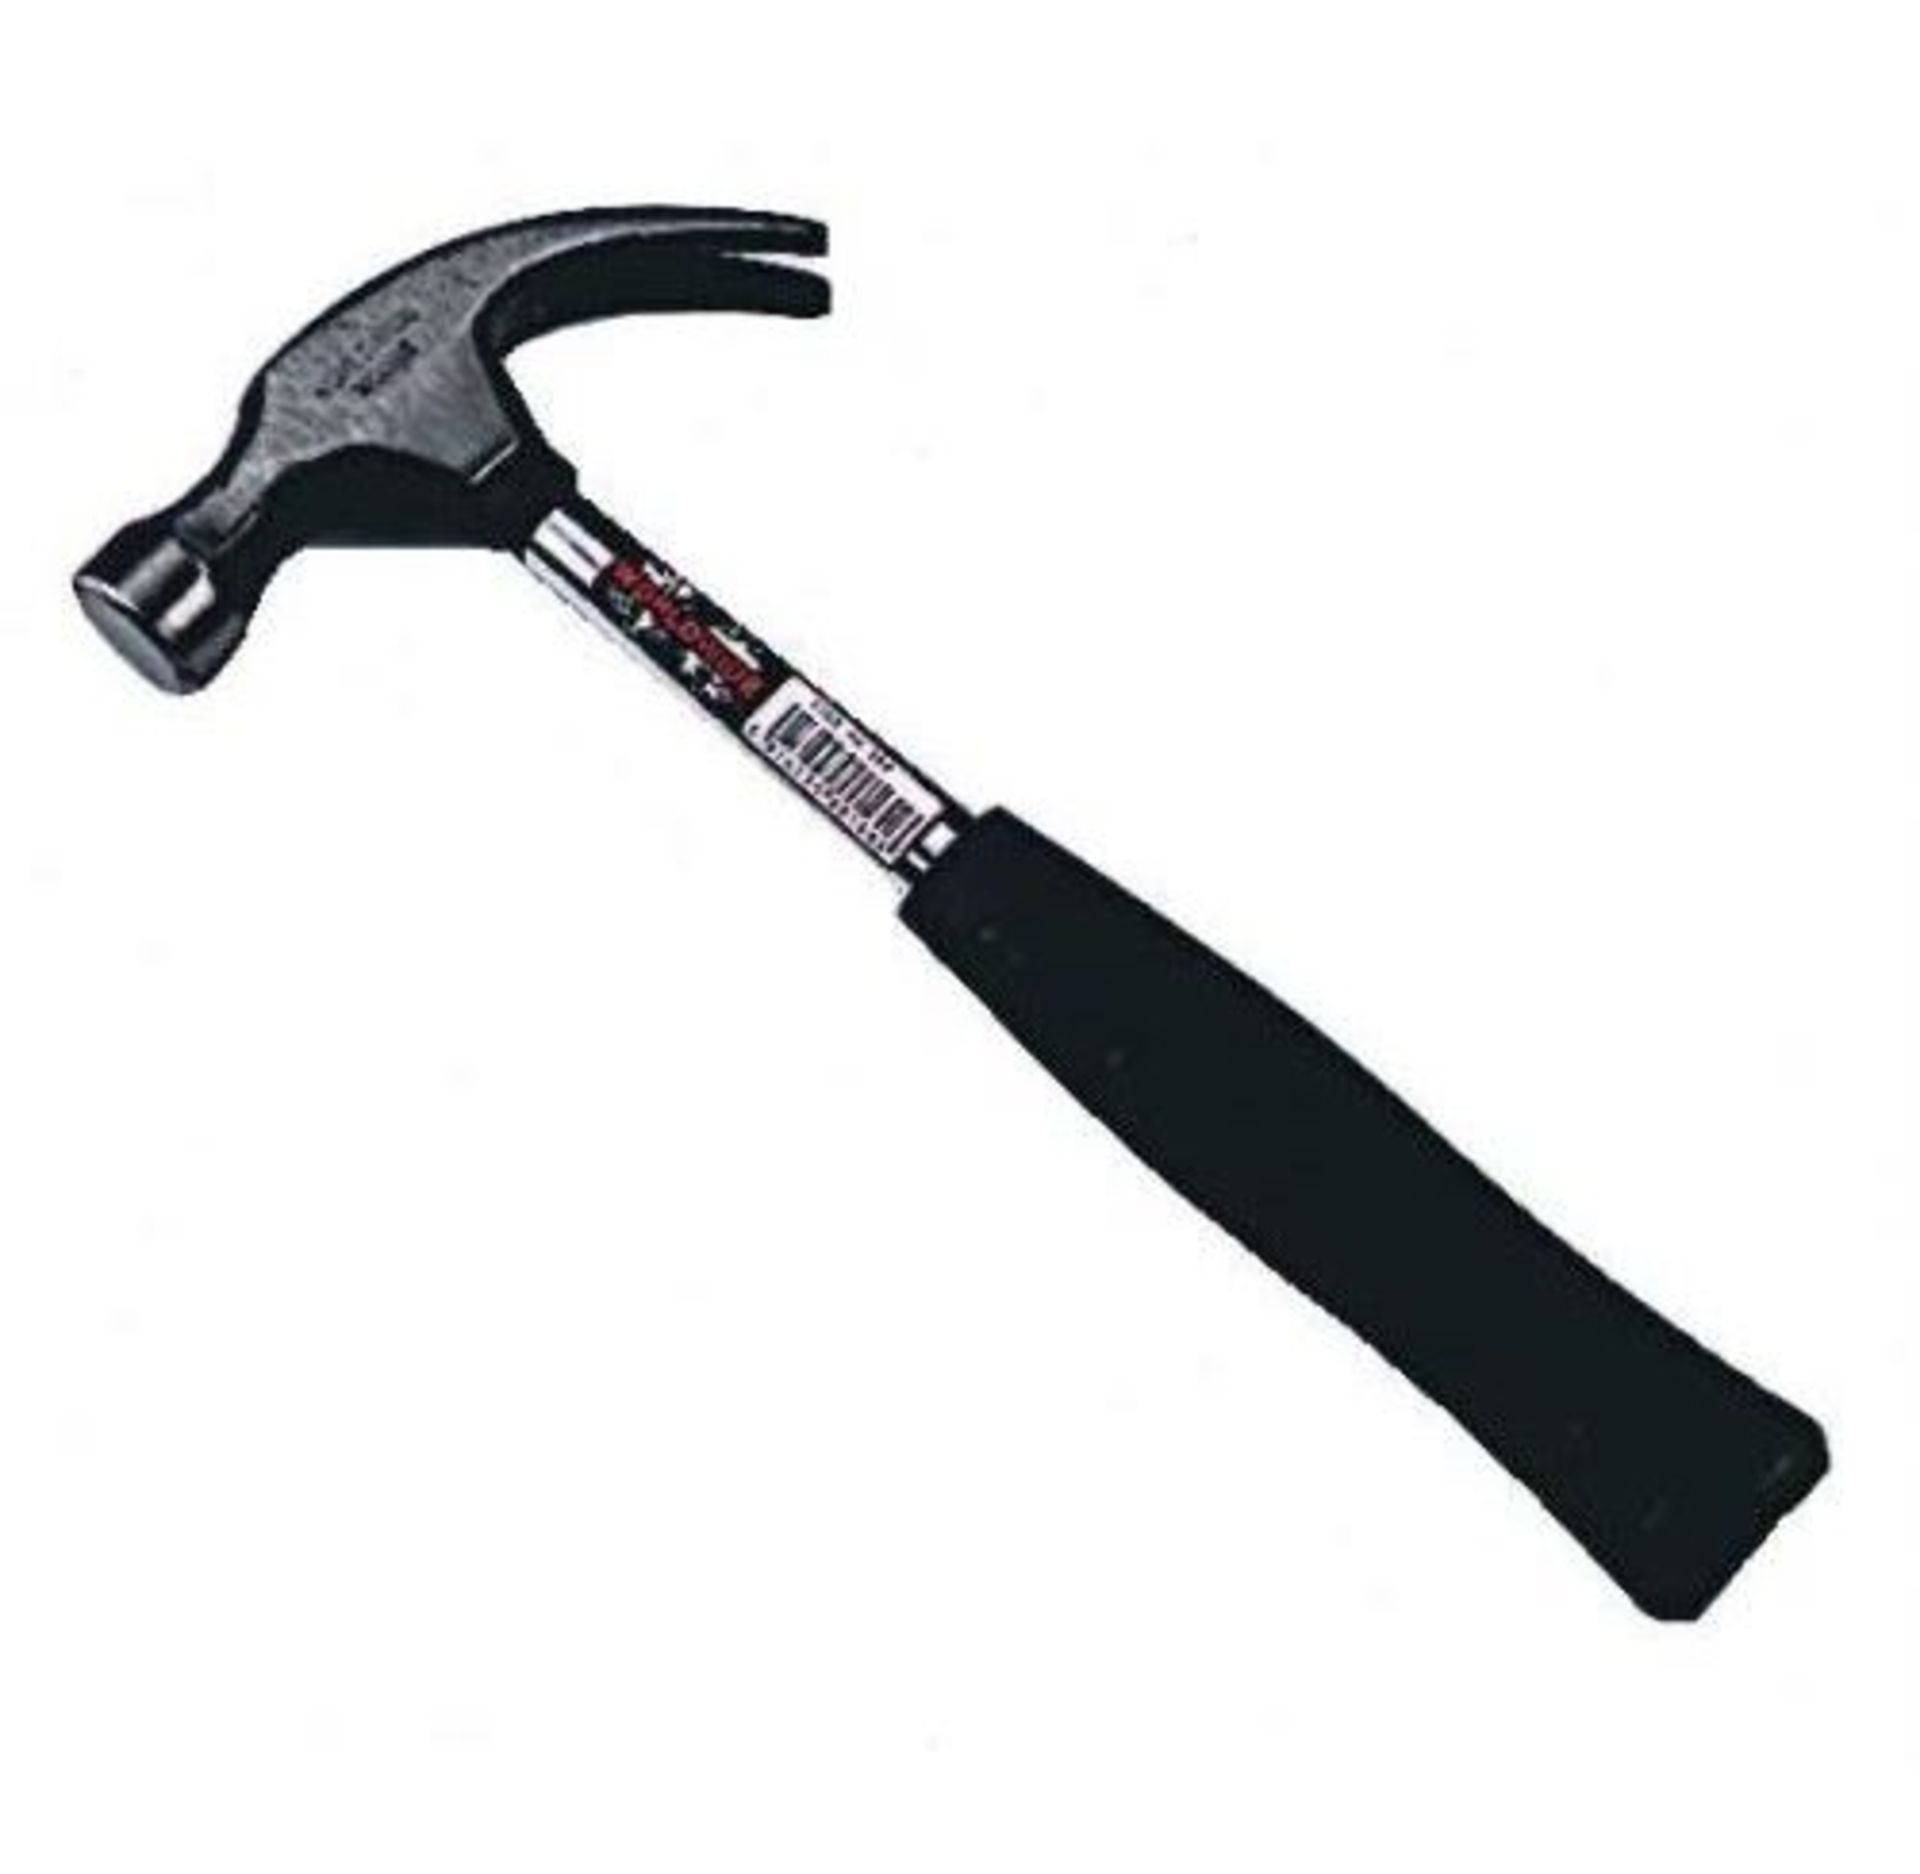 V *TRADE QTY* Brand New Green Valley Claw Hammer X 3 YOUR BID PRICE TO BE MULTIPLIED BY THREE